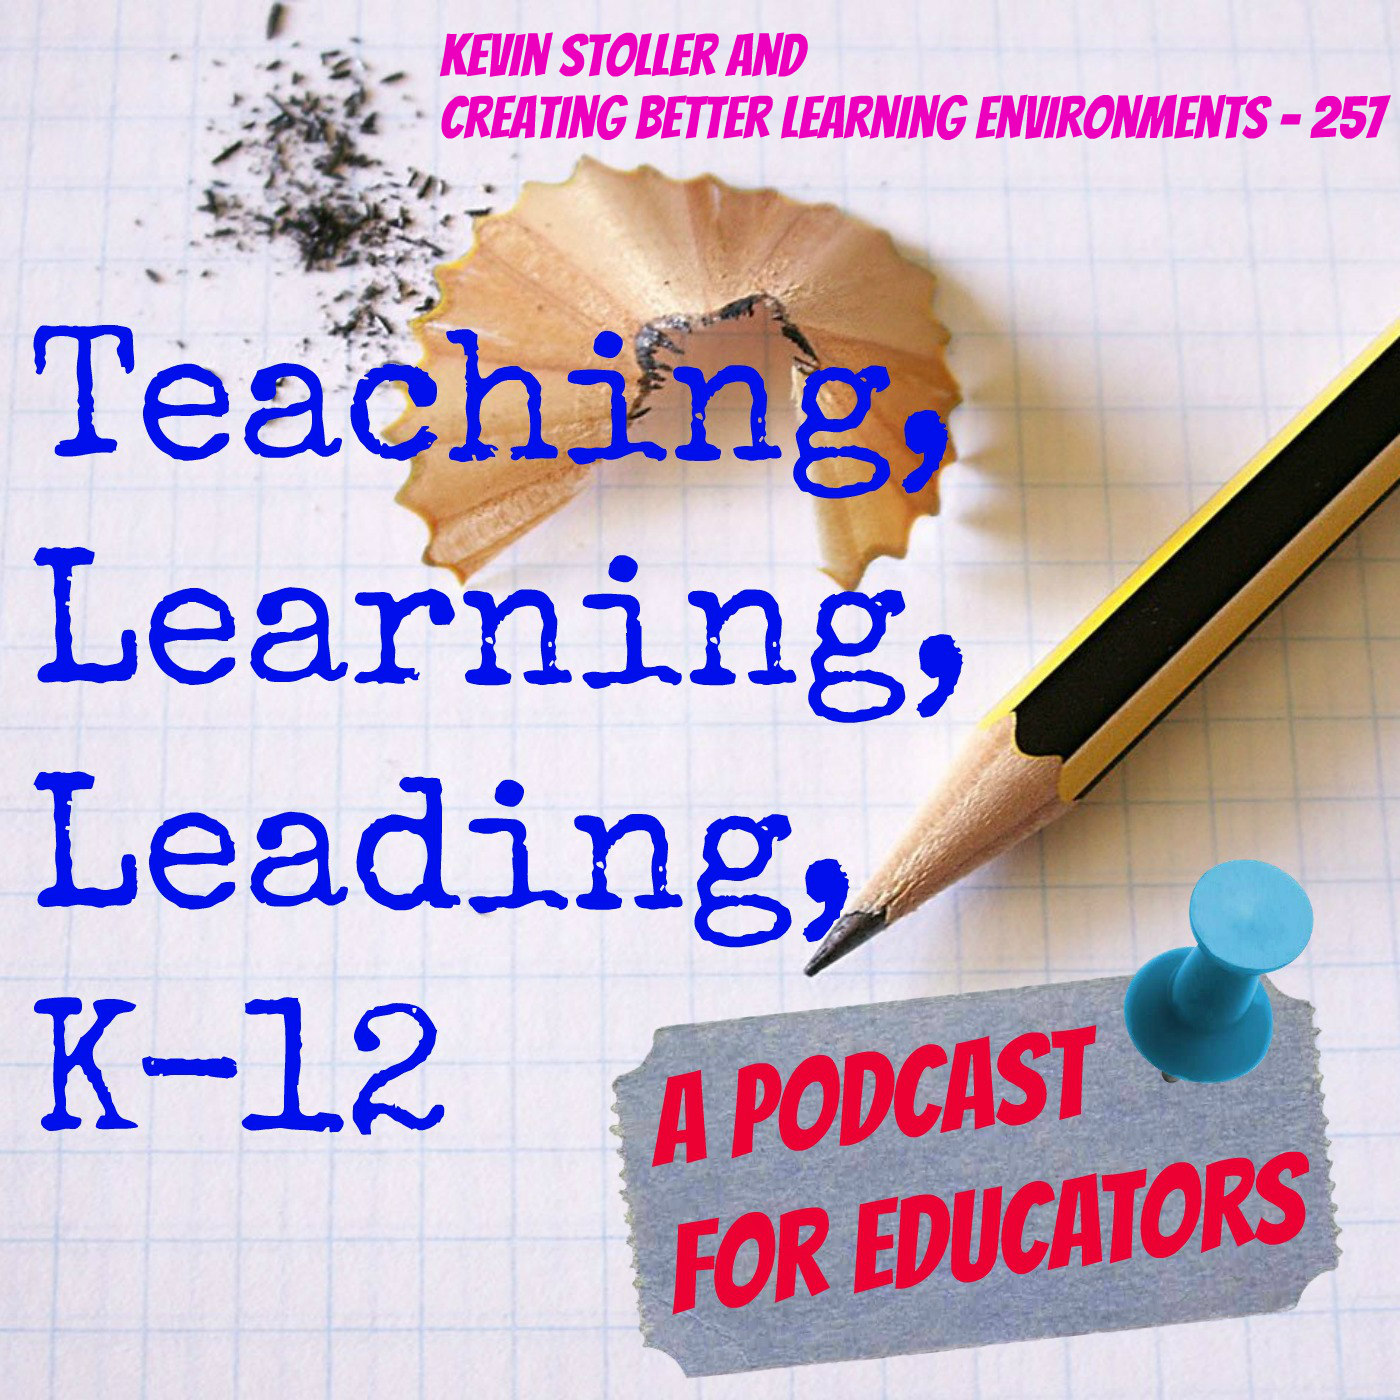 Kevin Stoller and Creating Better Learning Environments - 257 Image